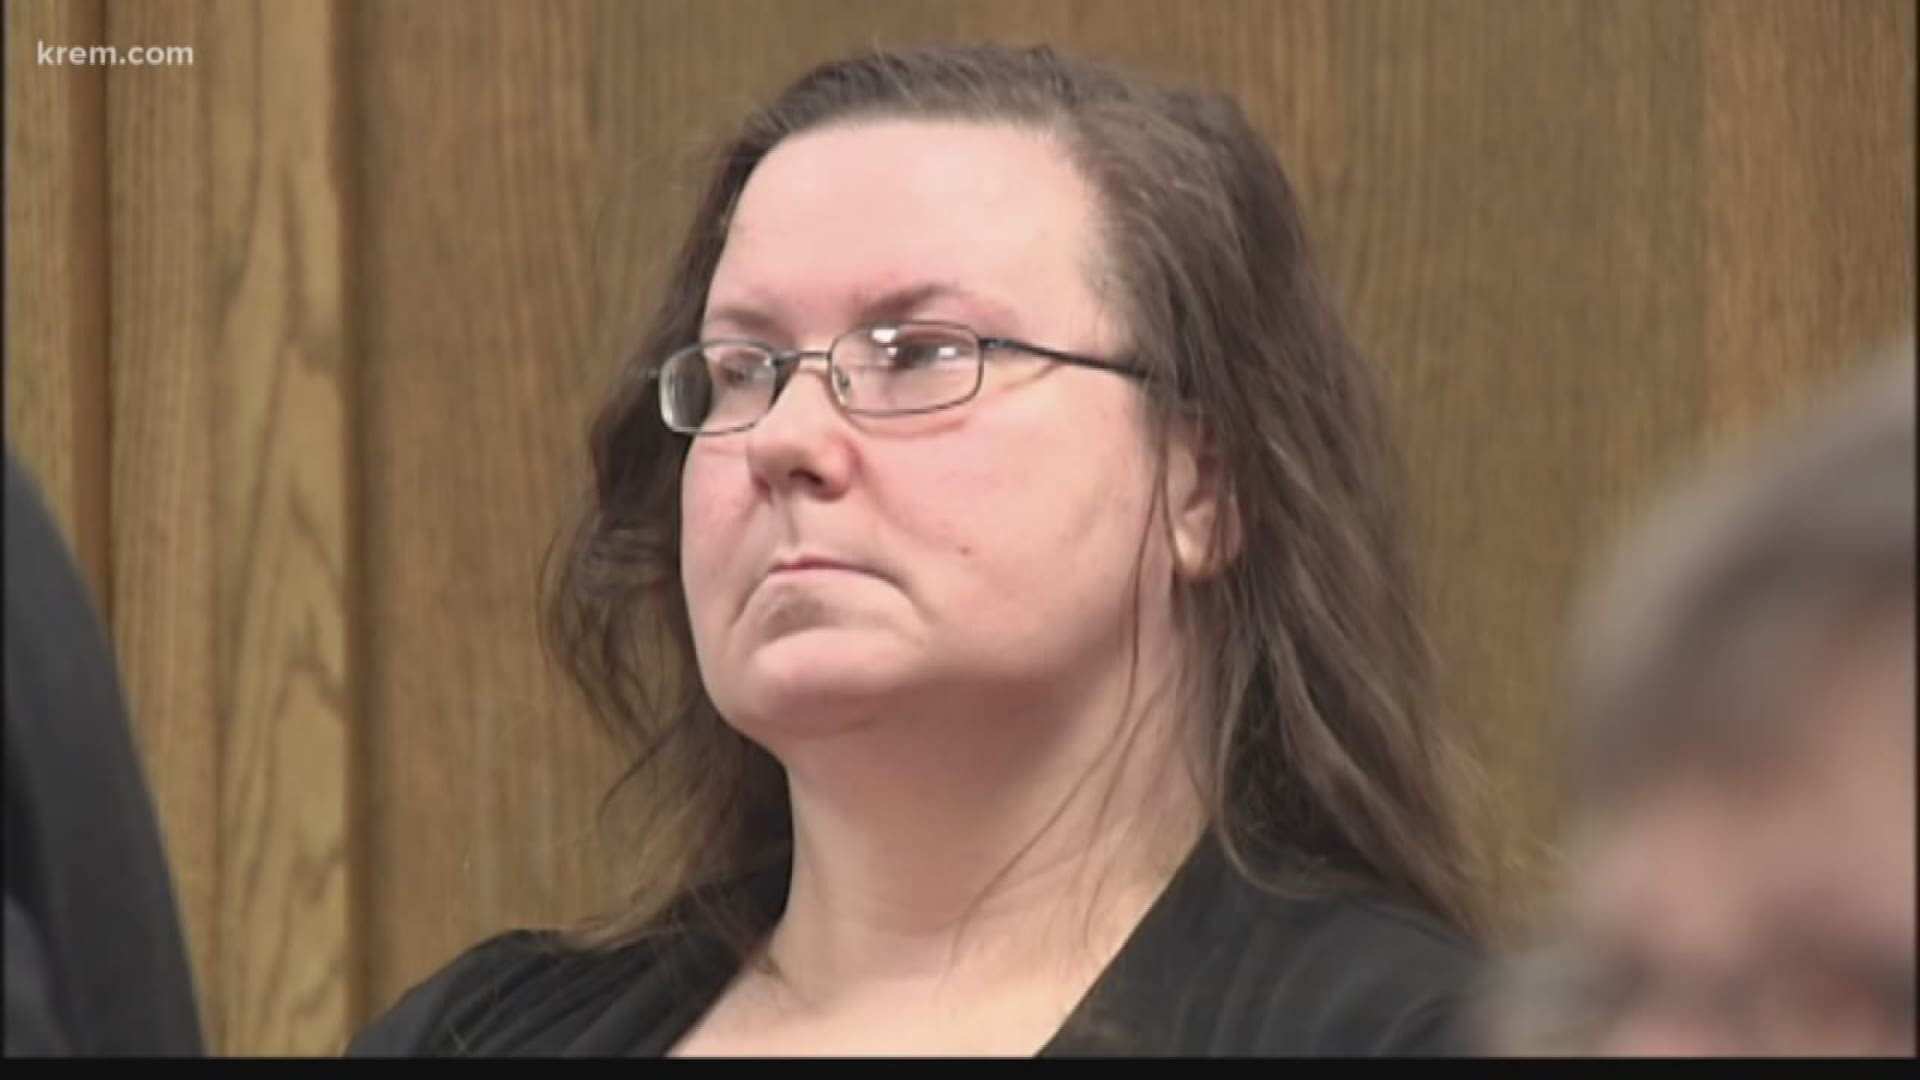 Tuesday, a Spokane Valley woman went on trial for plotting to kill her husband for insurance money. (3-20-18)